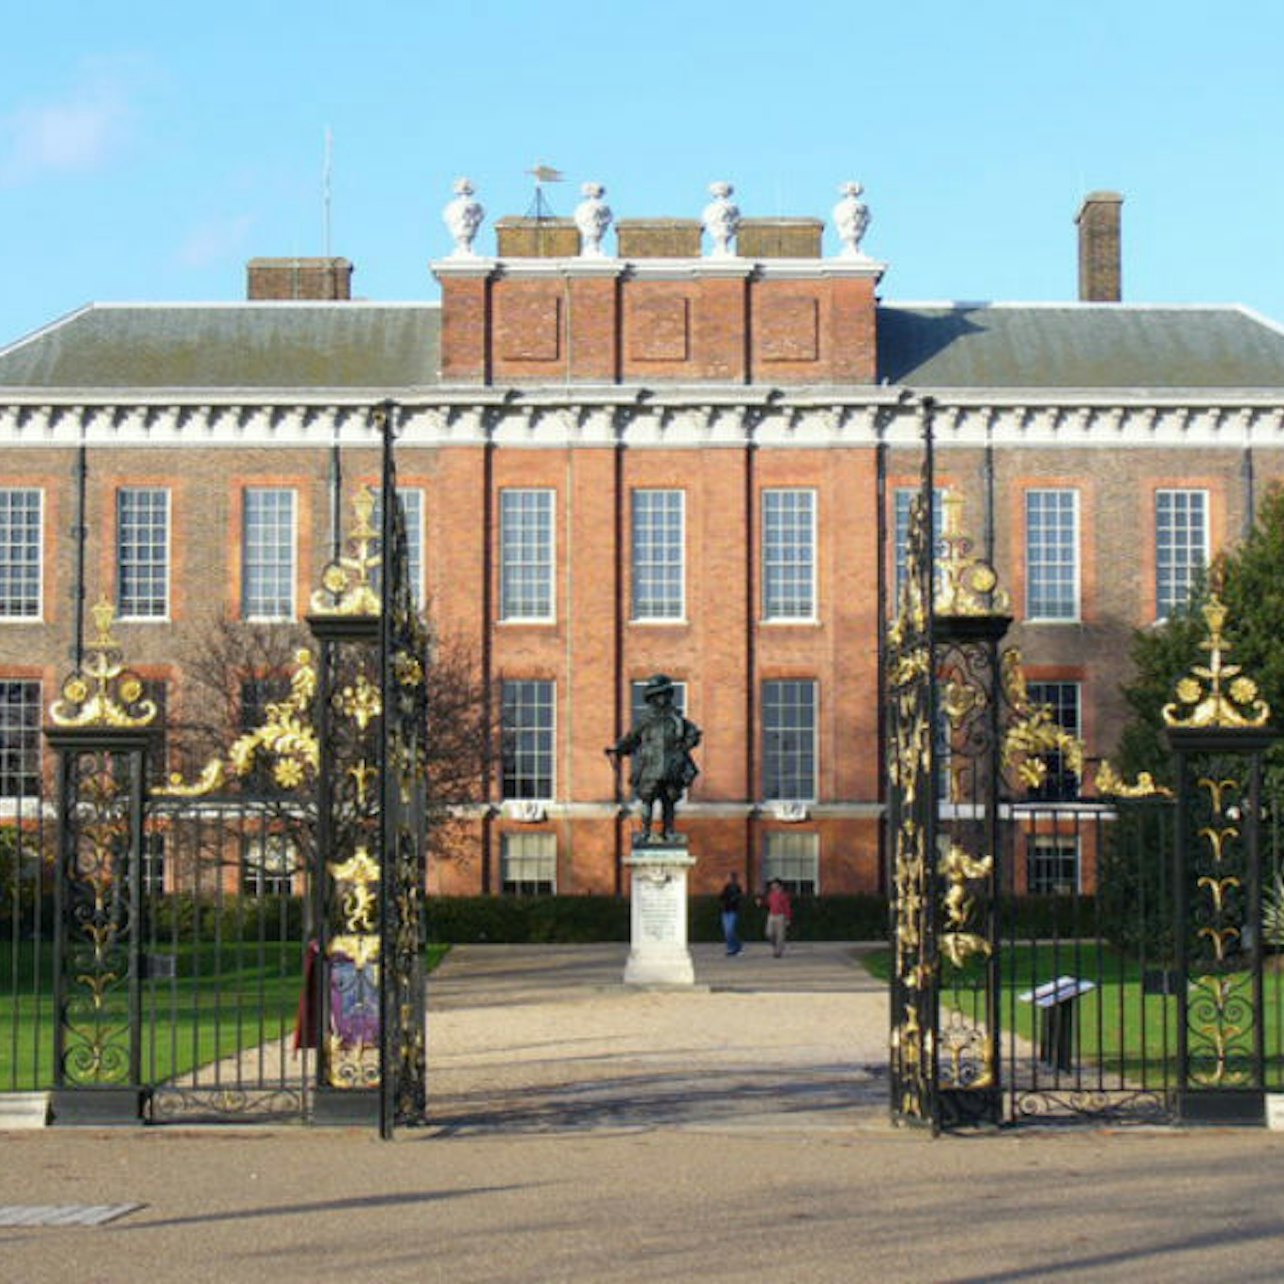 Kensington Palace - Accommodations in London